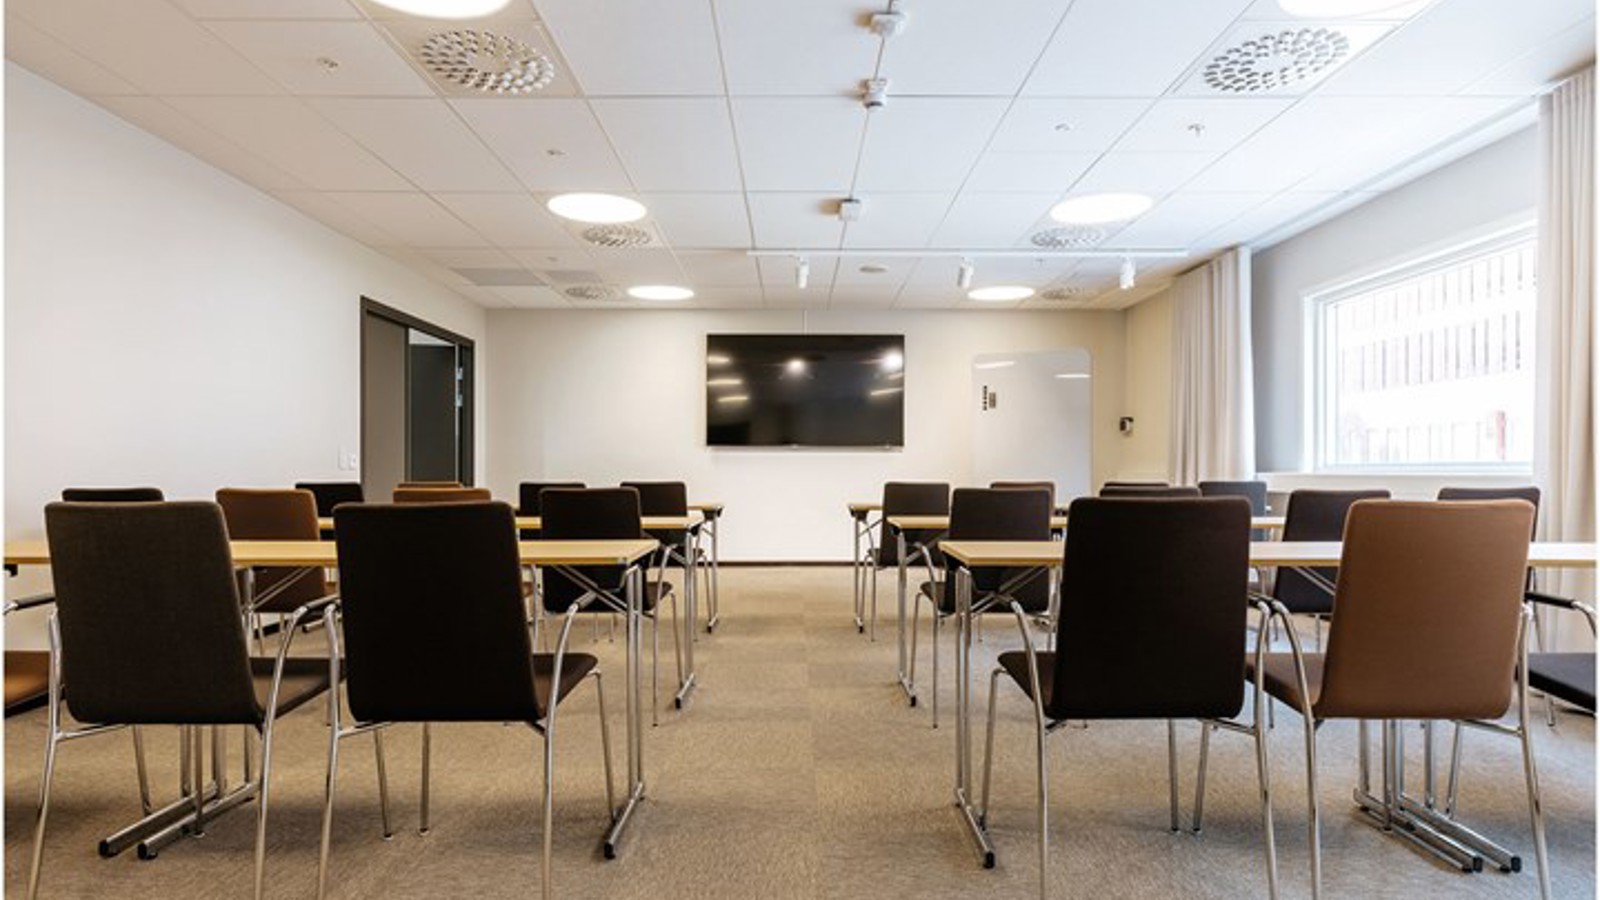 Conference room with school seating, white walls and brown carpet